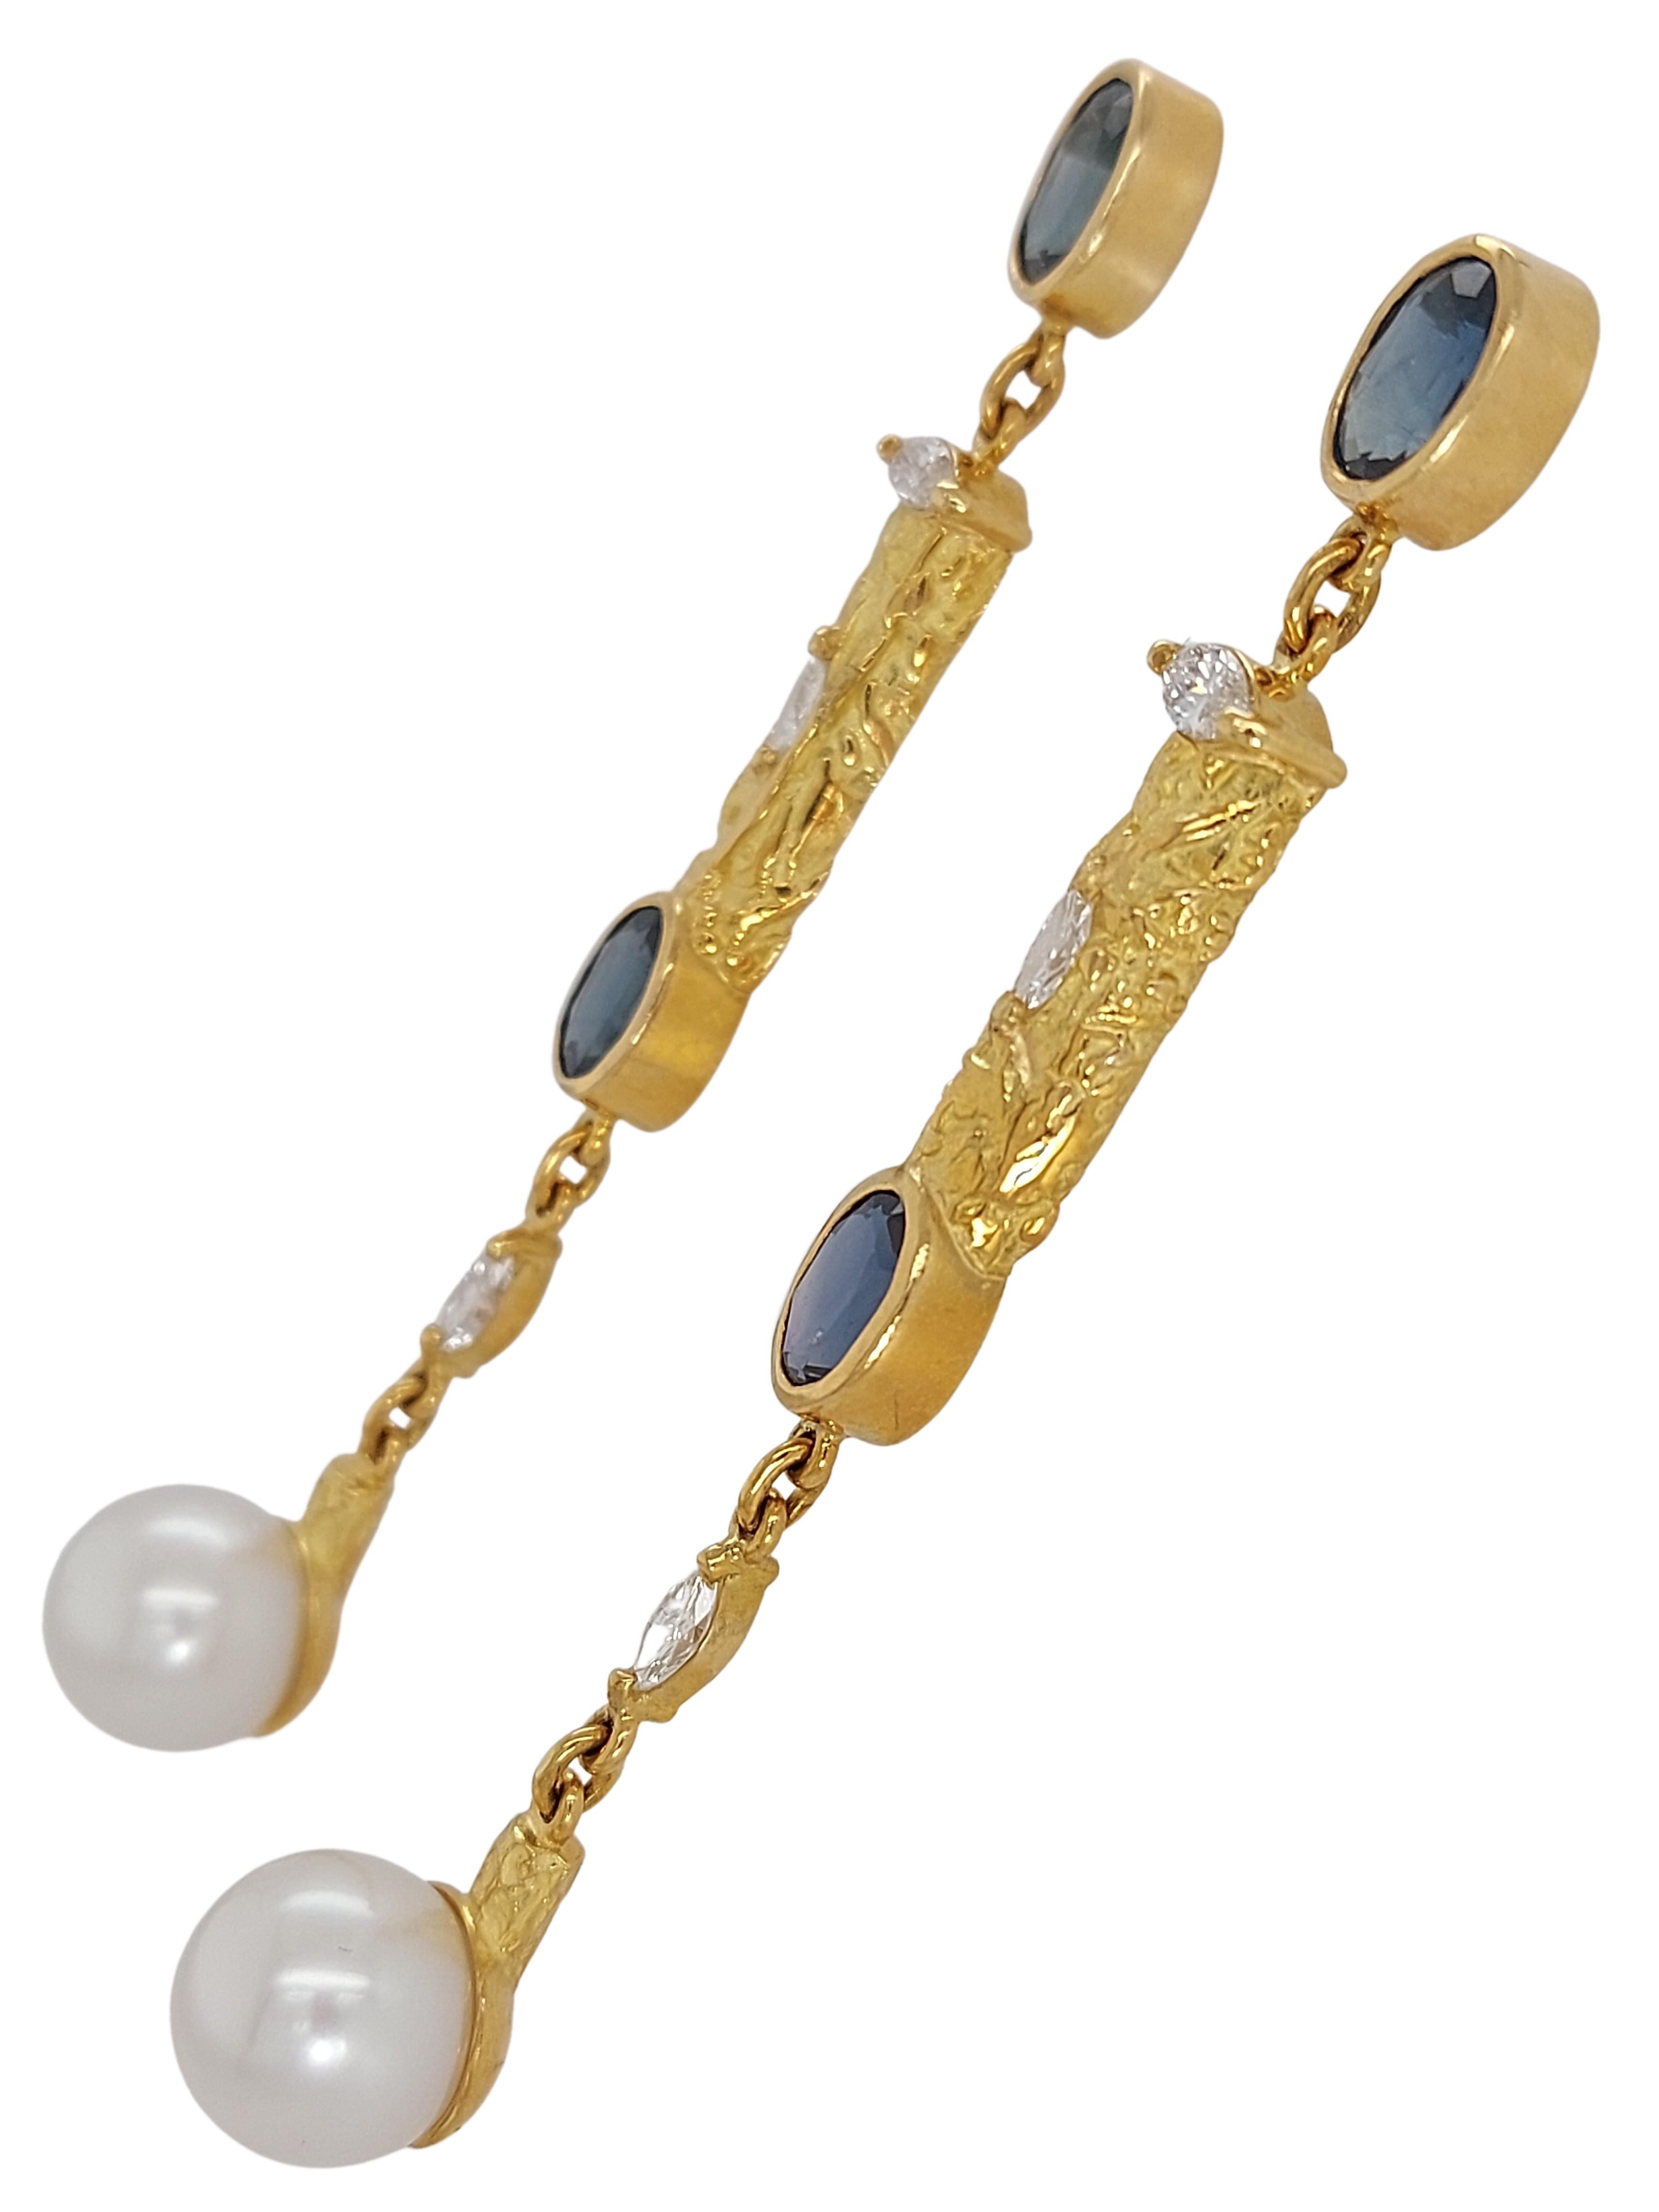 J.P De Saedeleer 18 Kt gold Earrings with 5.84 Ct Sapphires, Diamonds, Pearl For Sale 1